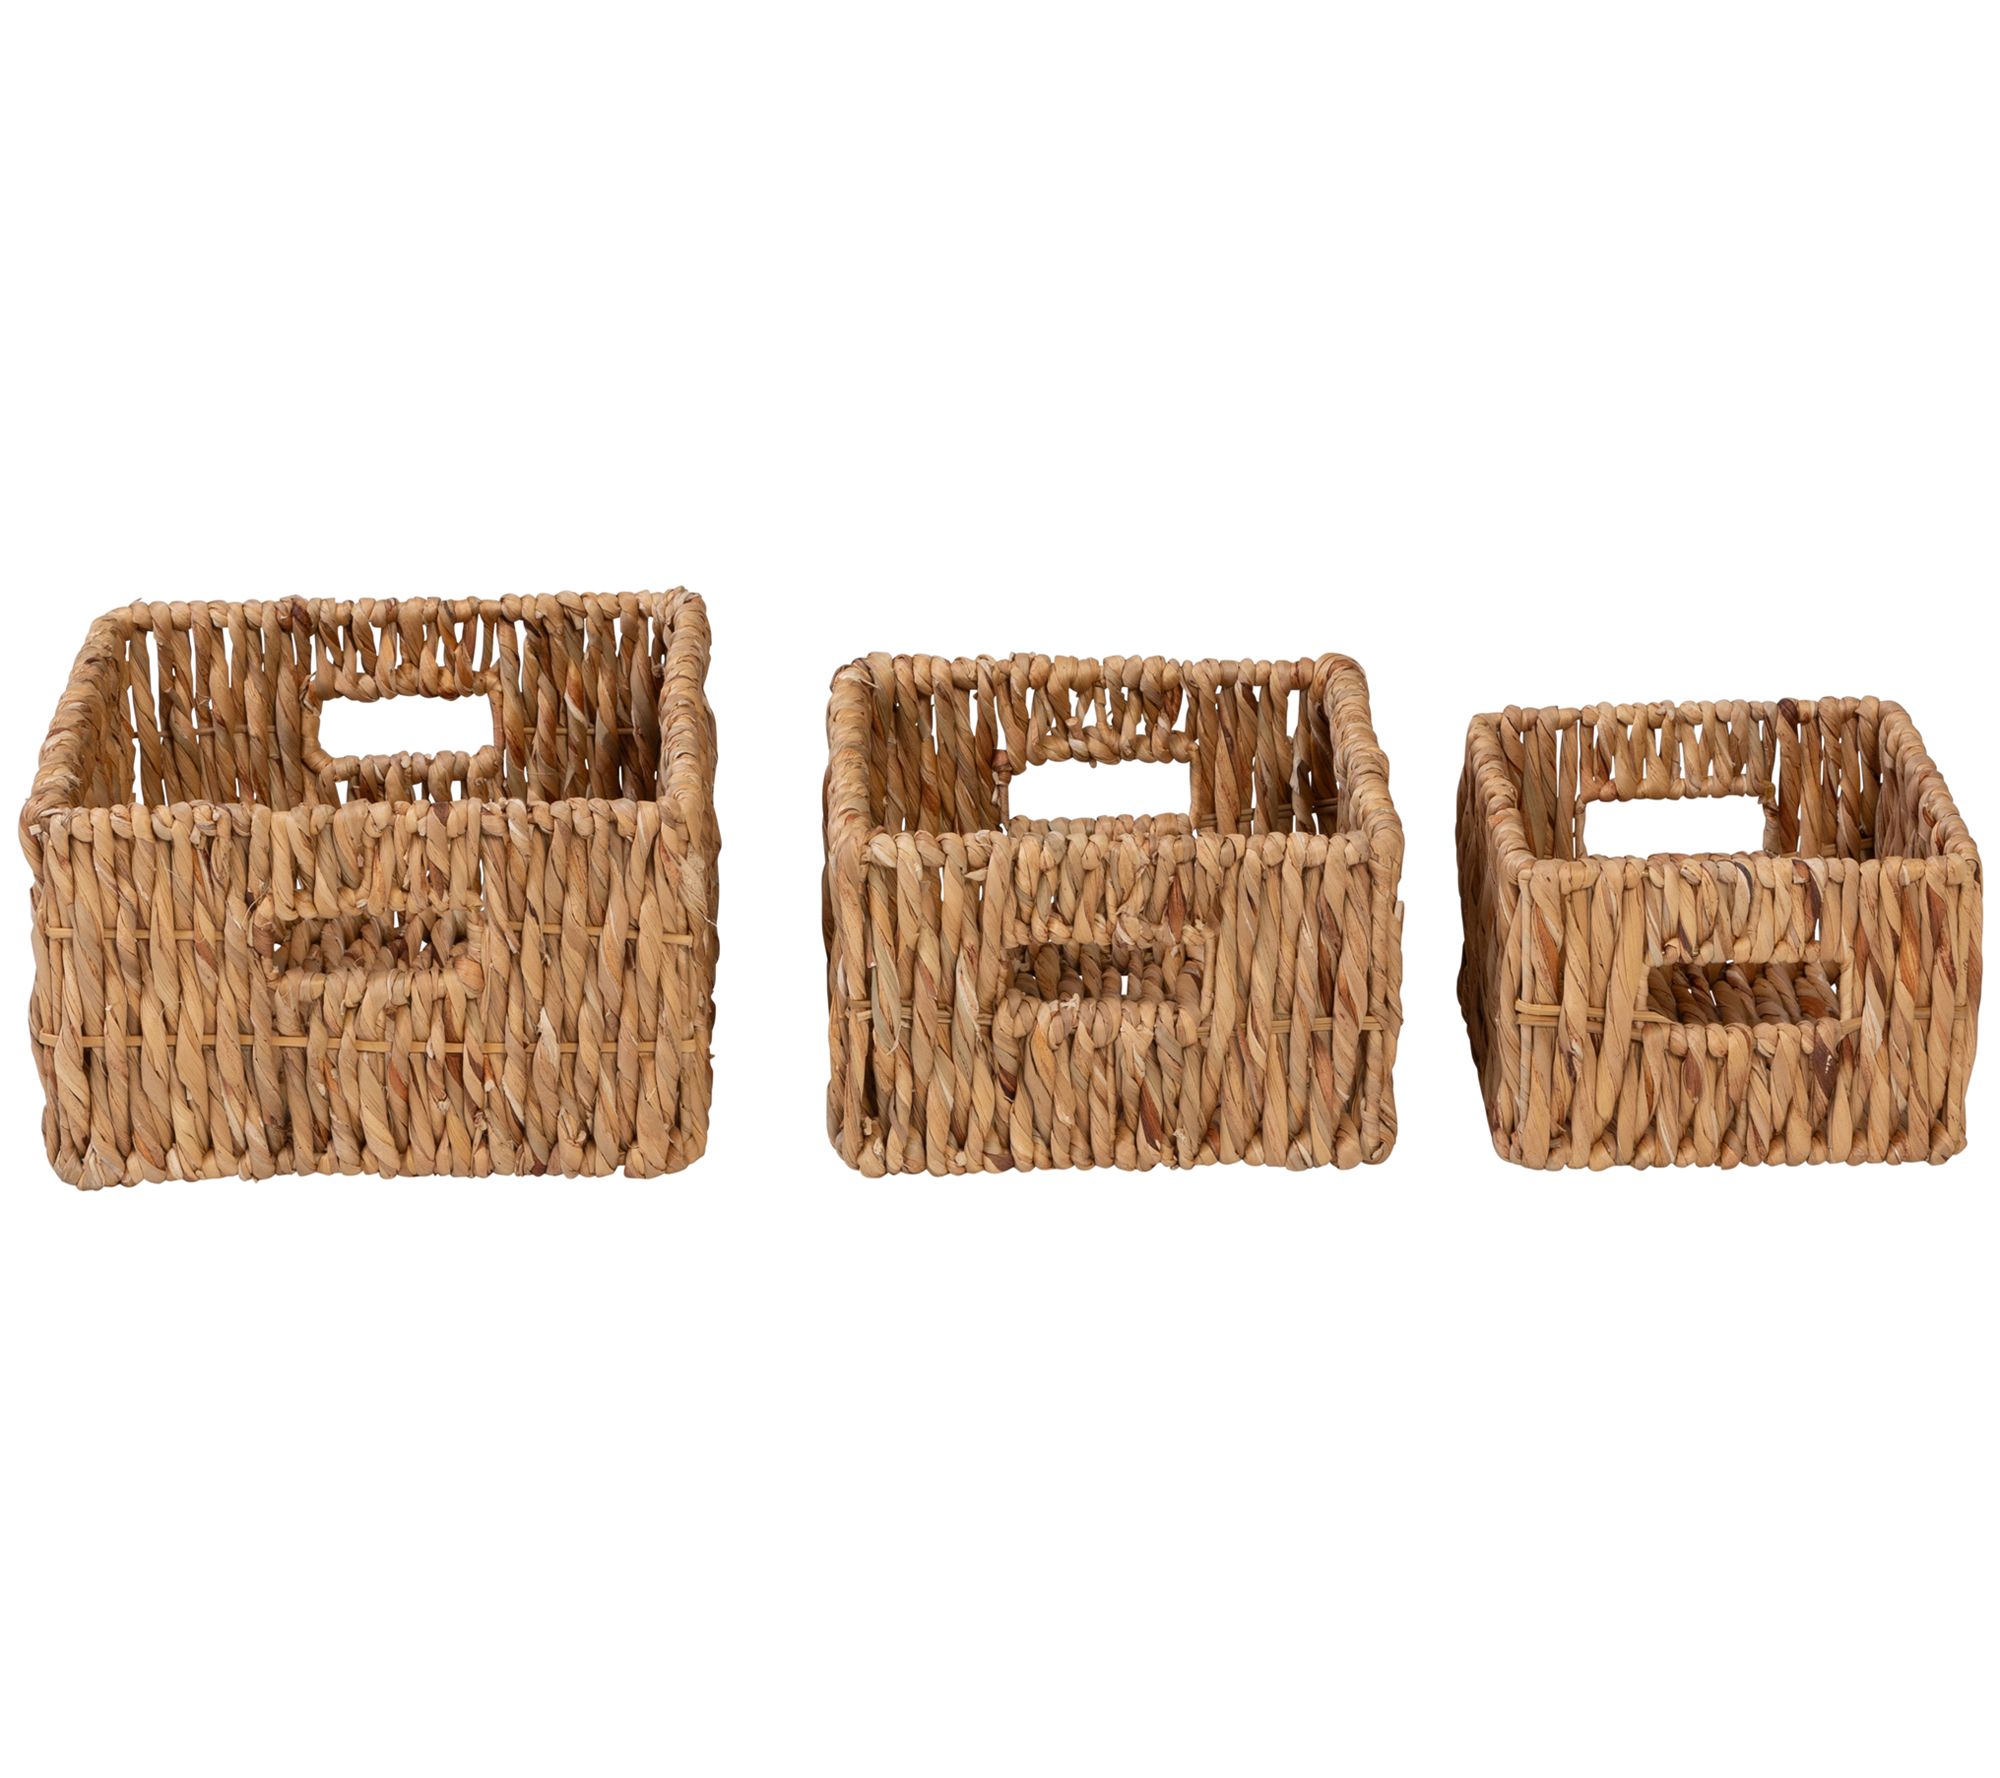 Honey Can Do Set of Two Fox Shaped Storage Baskets with Lid, Natural